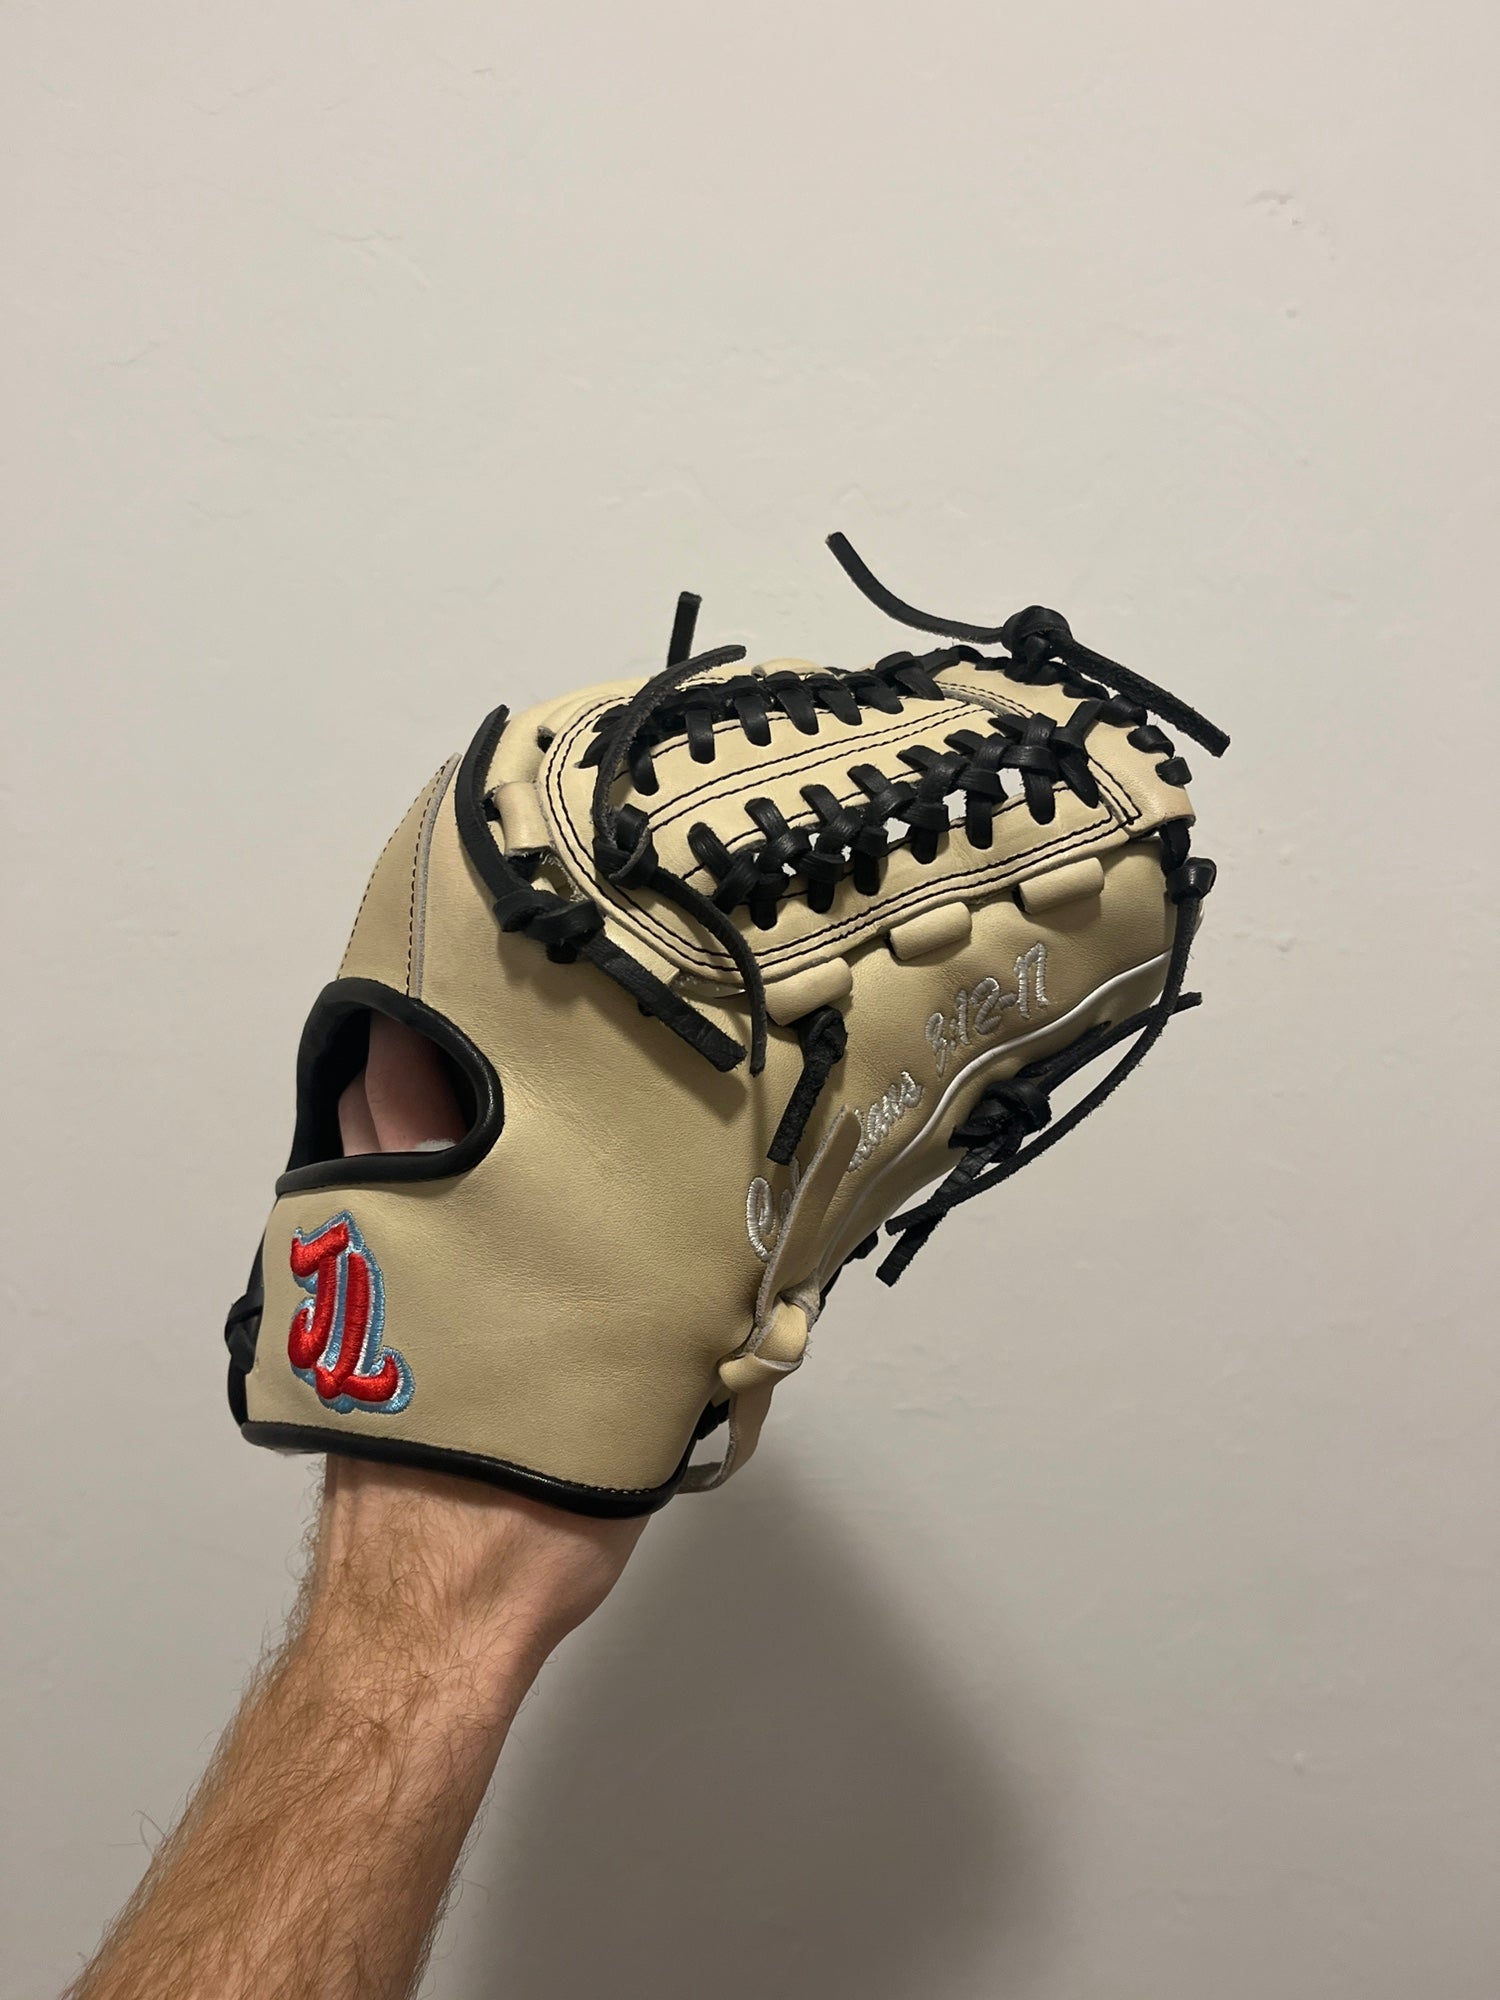 Davis Relacing - Wrapped up this Gloveworks X Davis